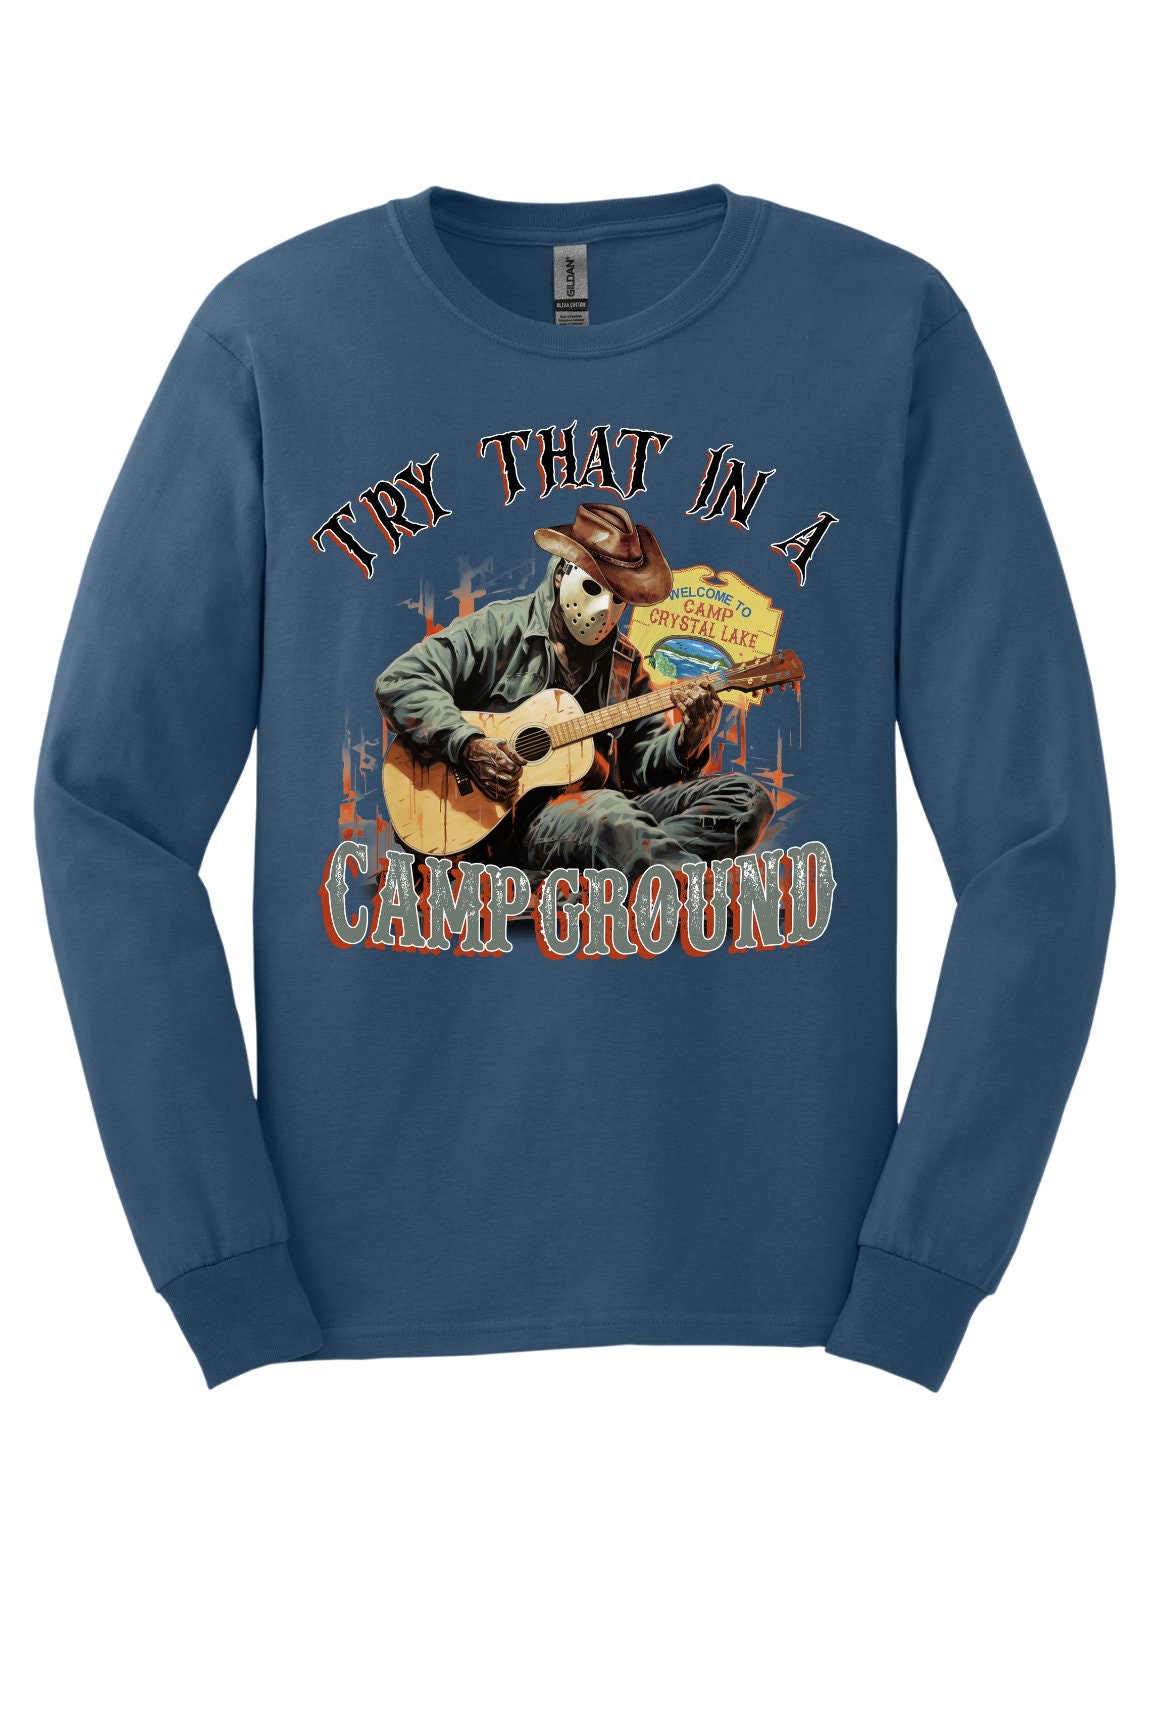 Try That In a Campground Halloween Long Sleeve Shirt, Cotton Adult Tee